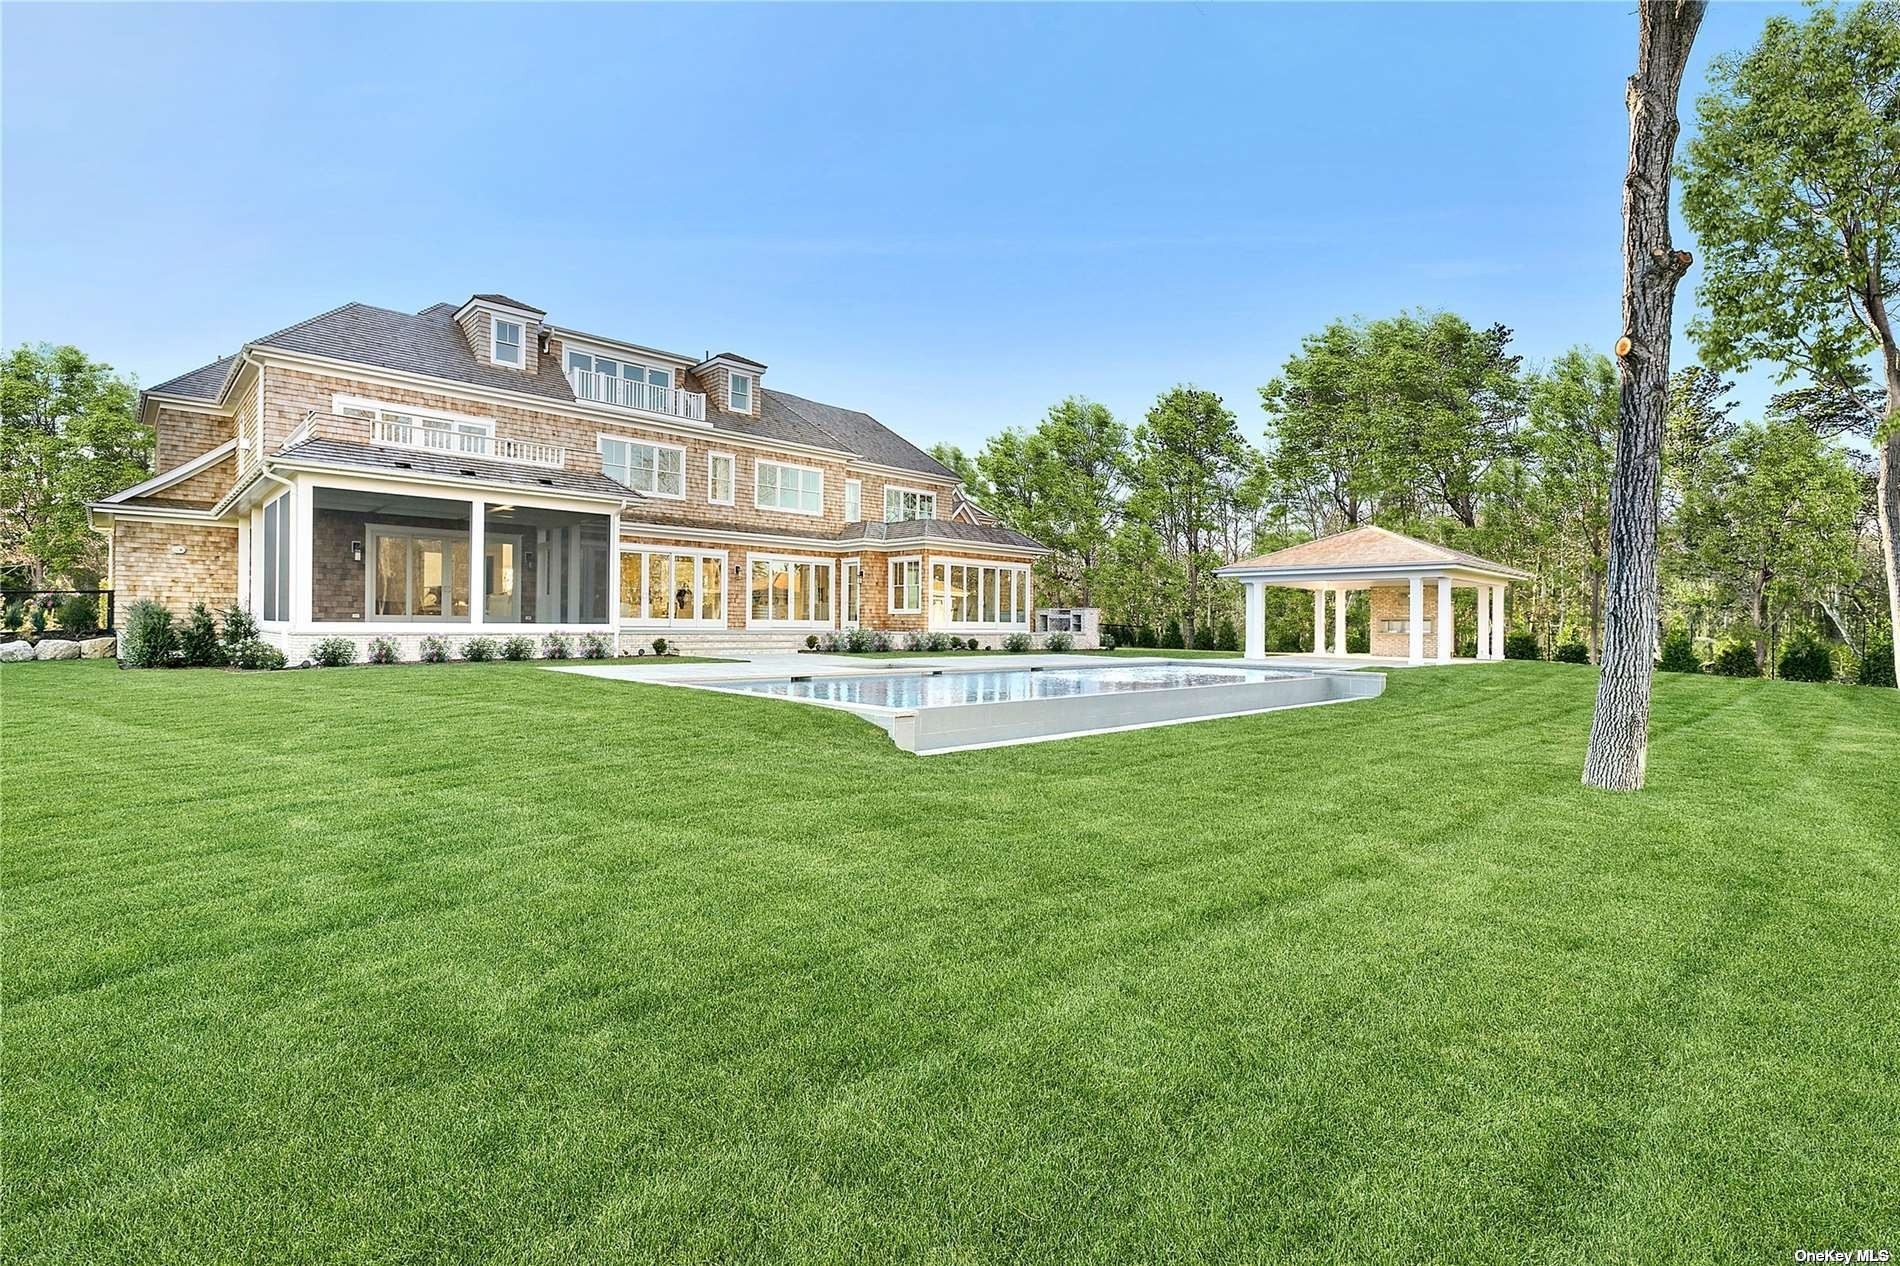 Single Family Home at Quogue Village